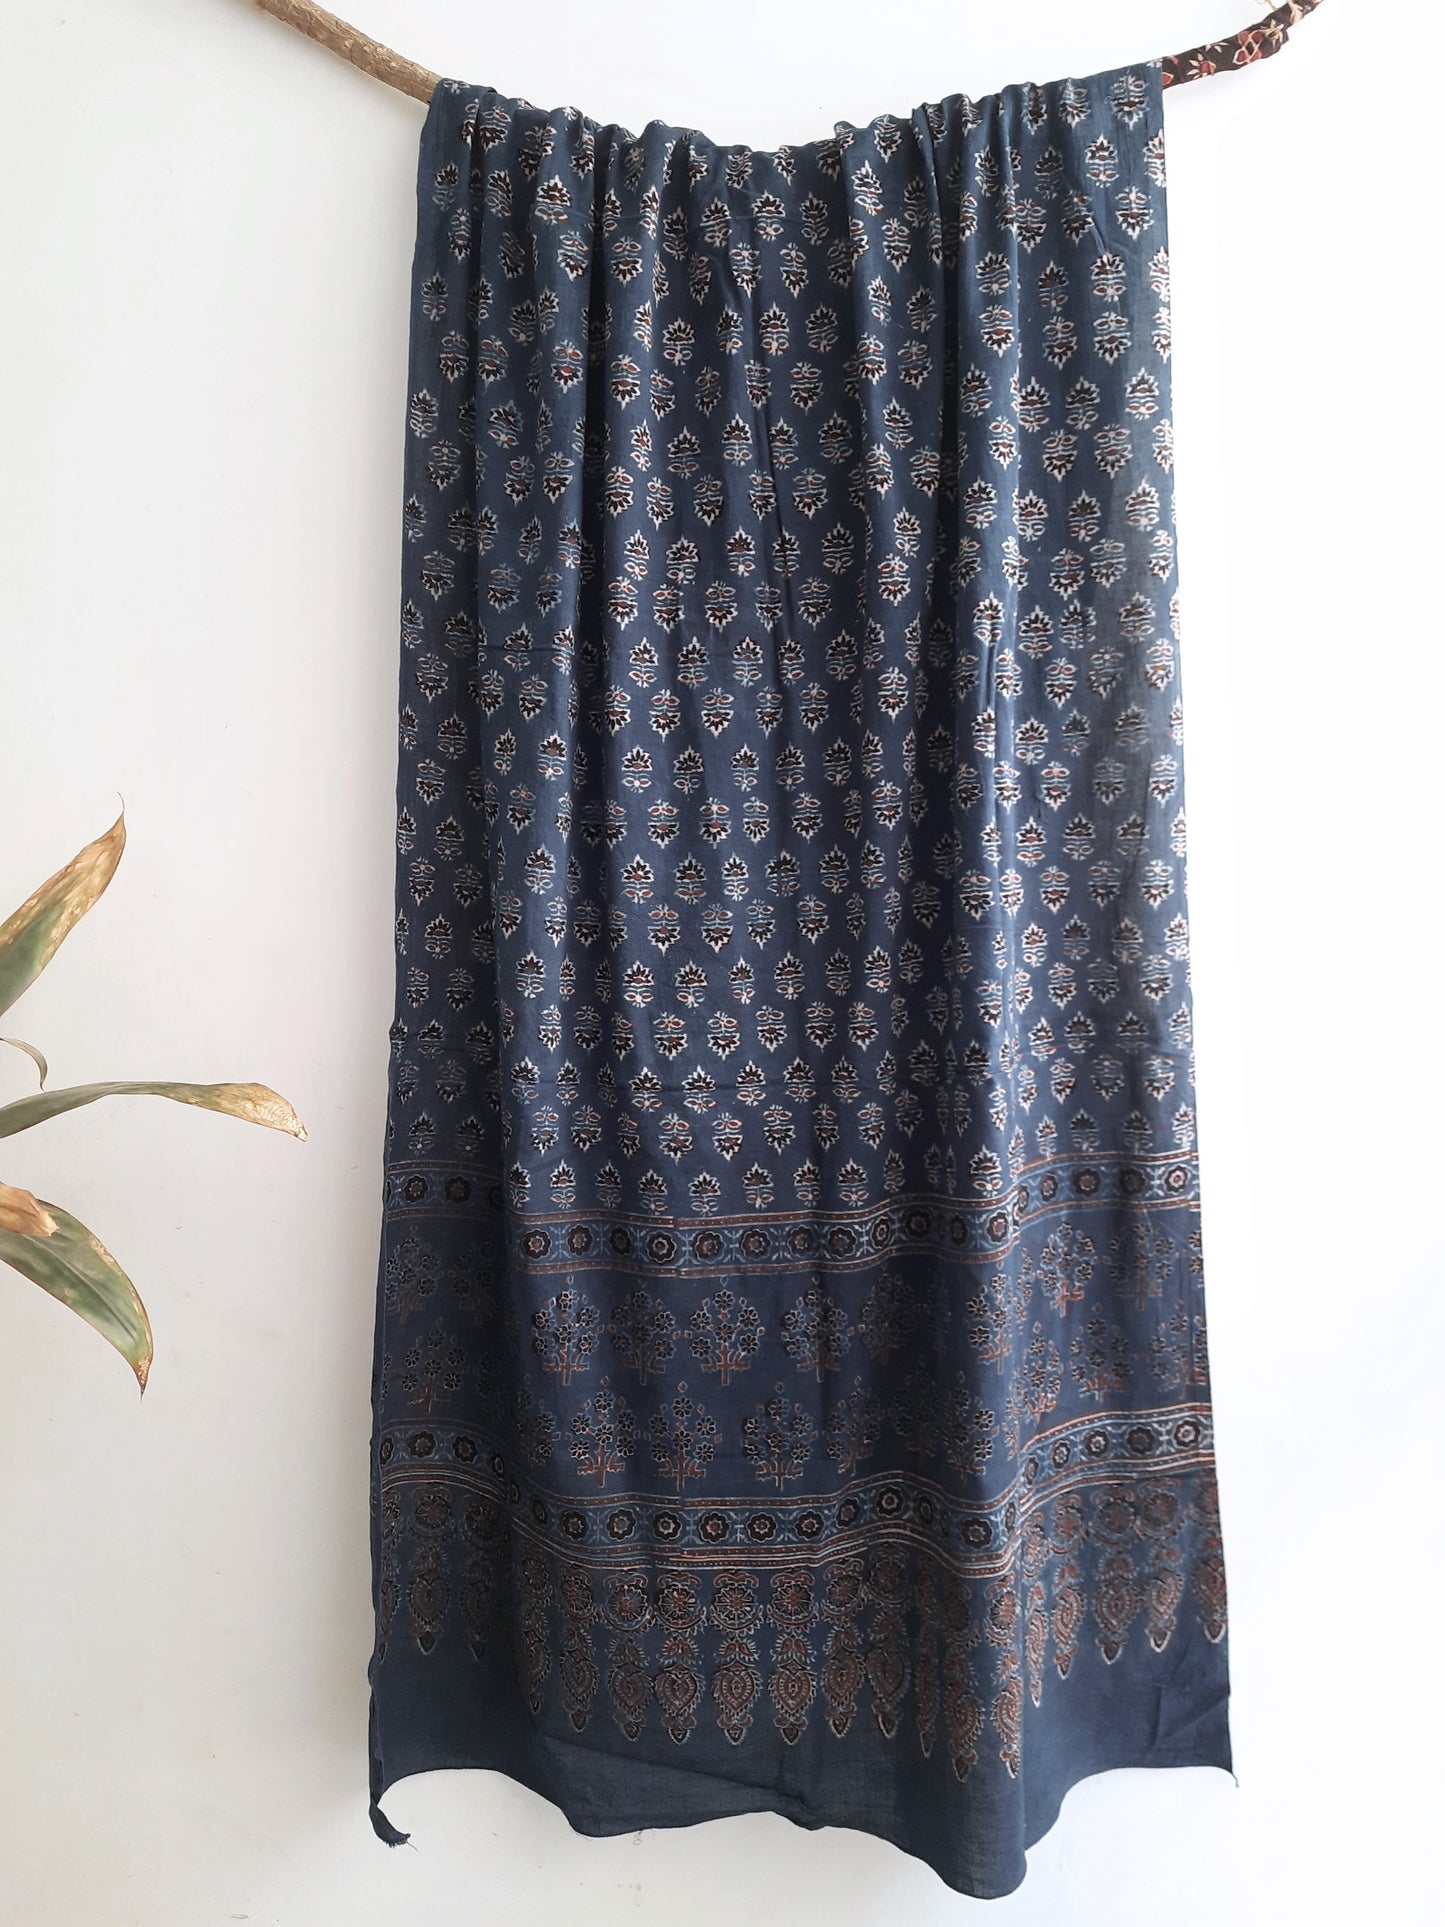 Close-up view of the Indigo Boota Ajrakh Cotton Dupatta, showcasing intricate hand block printing with authentic ajrakh techniques on 100% cotton fabric. A versatile and enduring accessory for a stylish summer look.